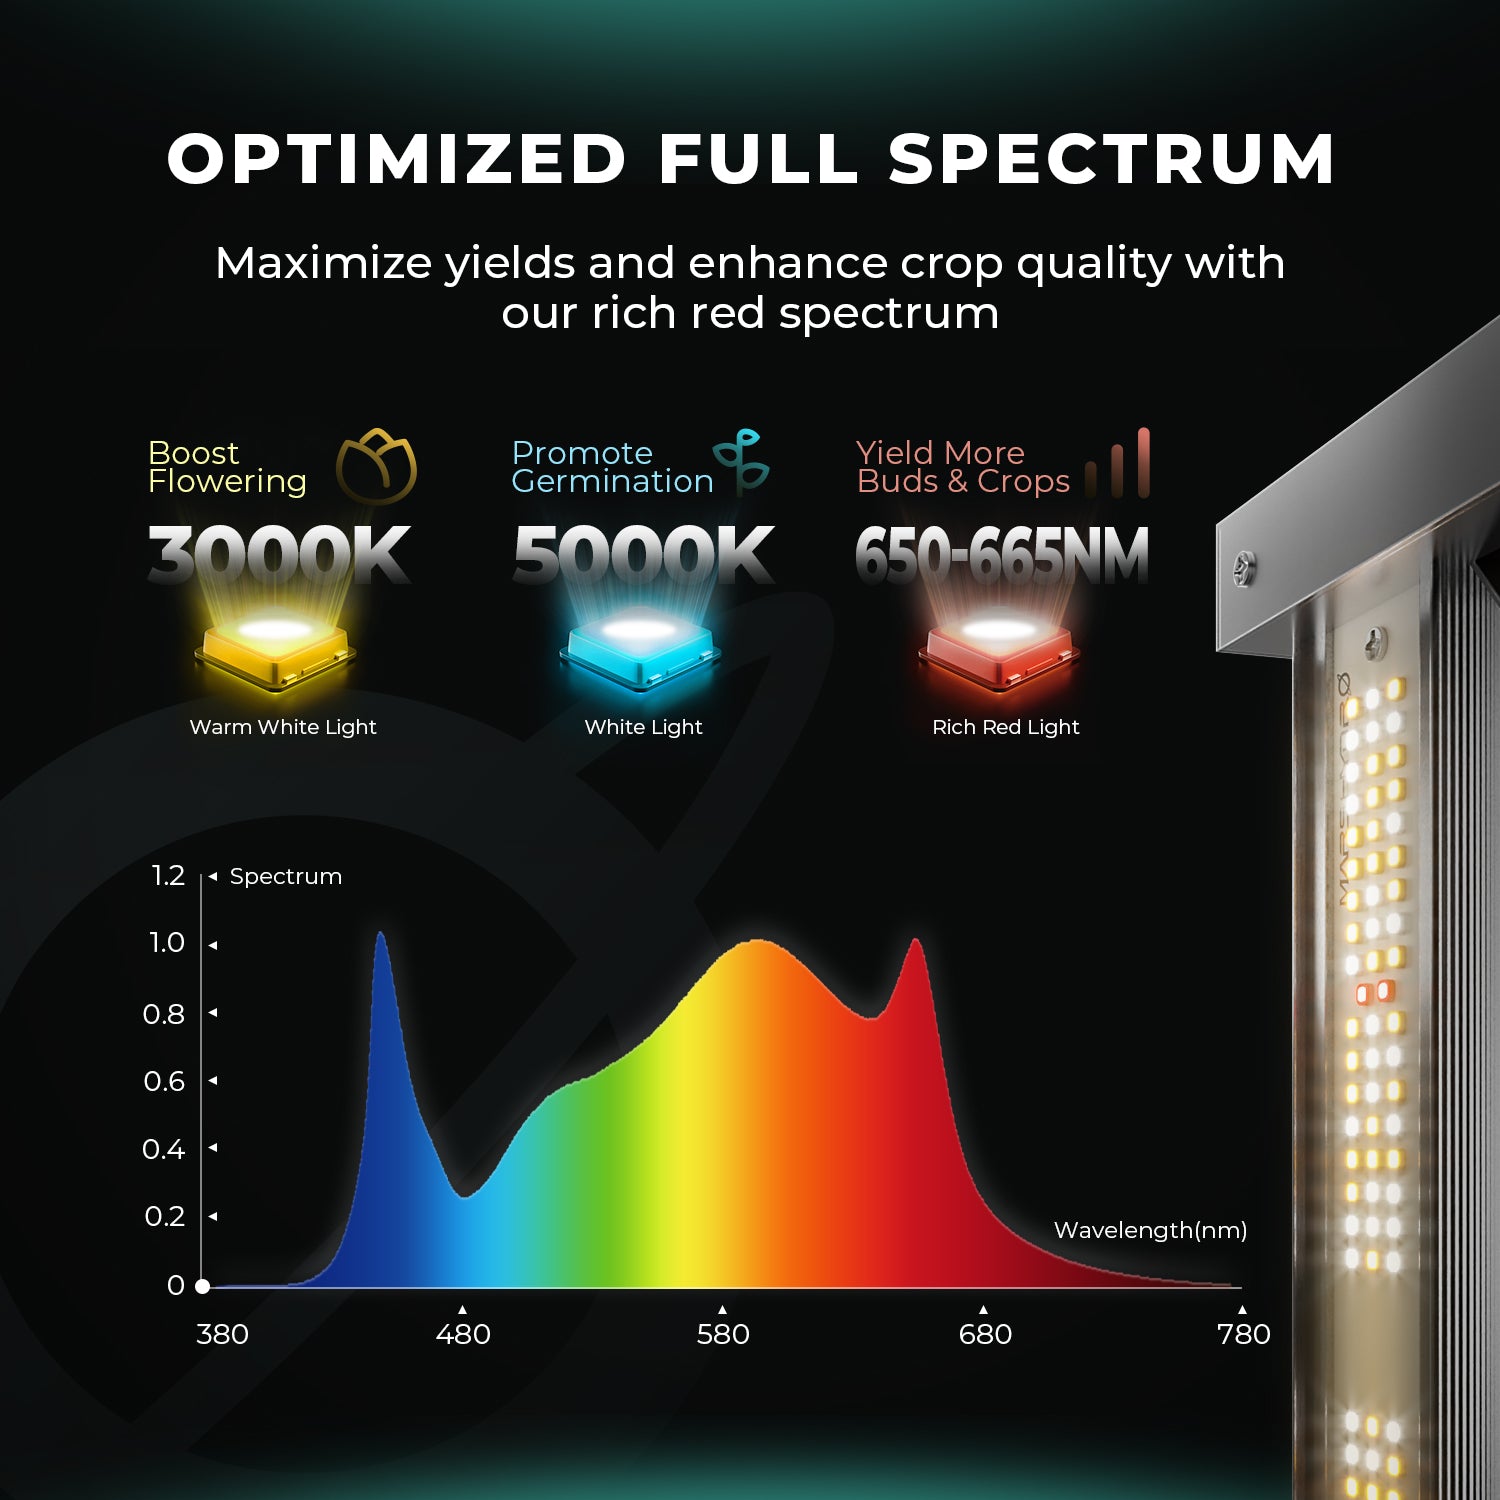 Mars Hydro Smart Grow System FC 4800 Samsung 480W Commercial LED Grow Lights